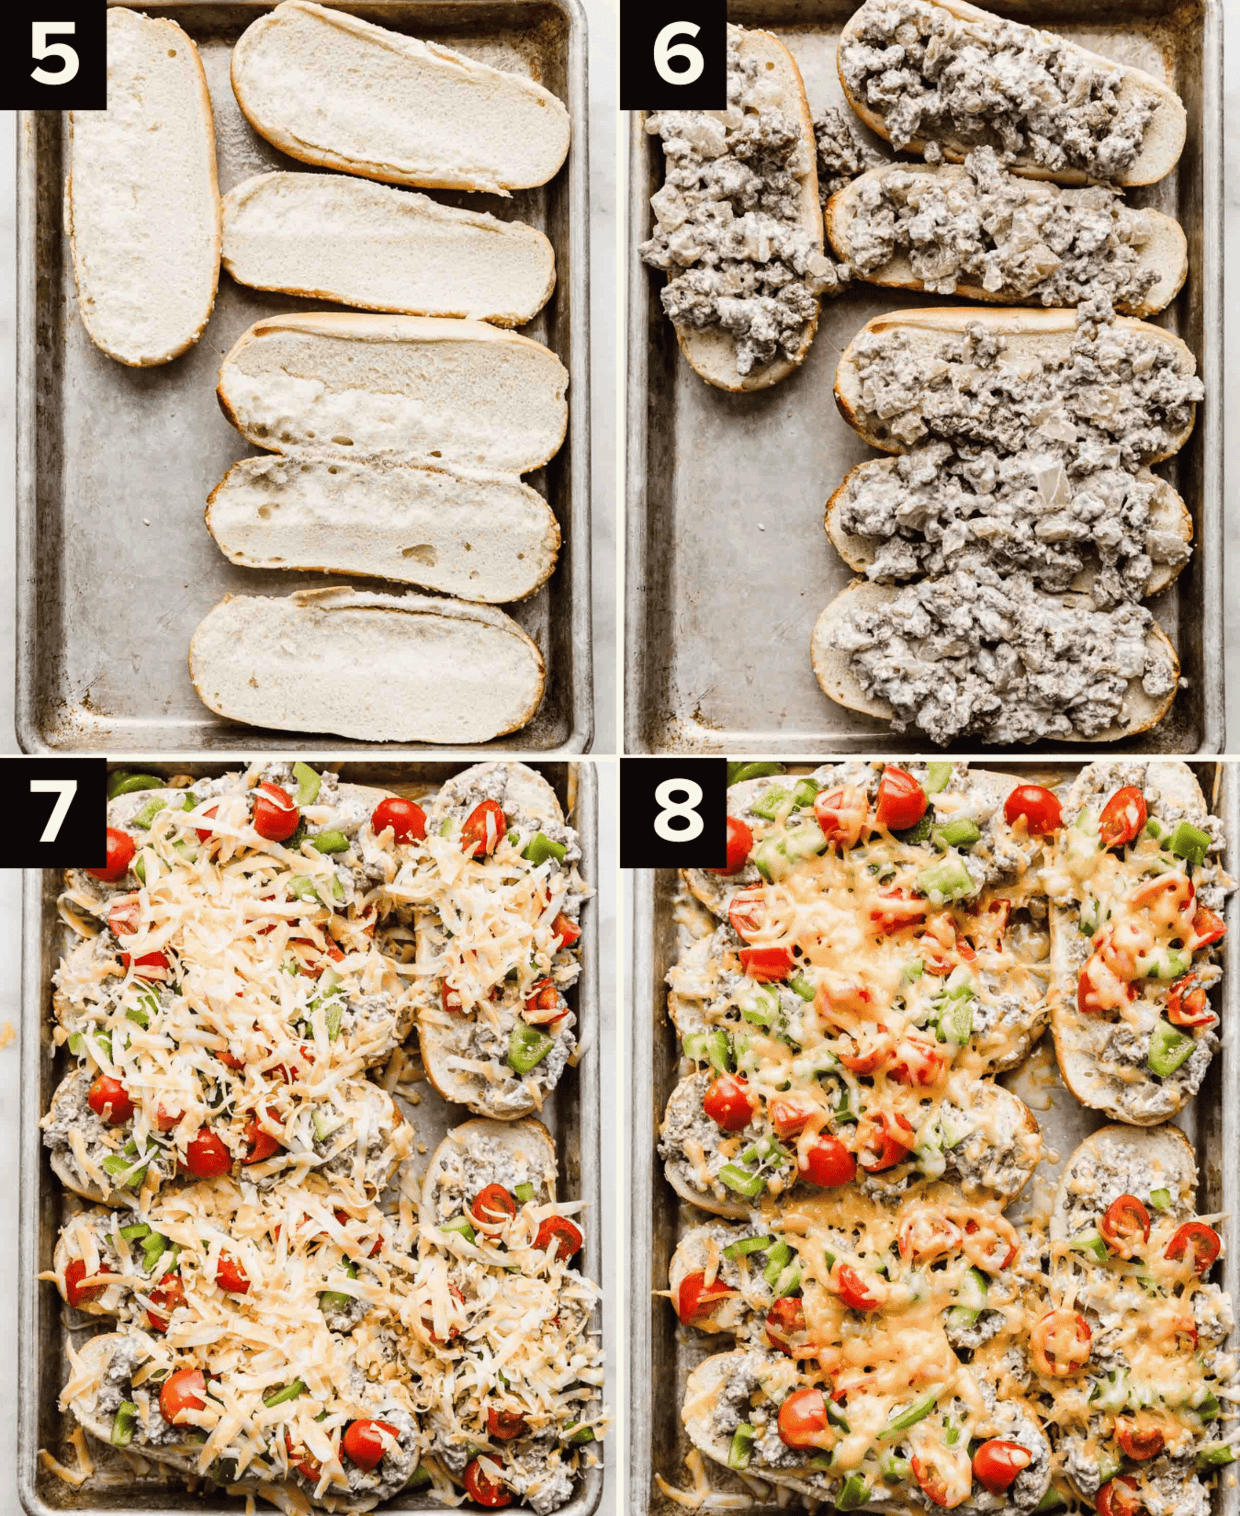 Four images: top left is hoagie bun halves on a baking sheet, top right image is beef stroganoff mixture on top of the bread halves, bottom left image is the buns and meat topped with tomatoes, green peppers, and shredded cheese, bottom right image is the Beef Stroganoff Sandwiches baked.